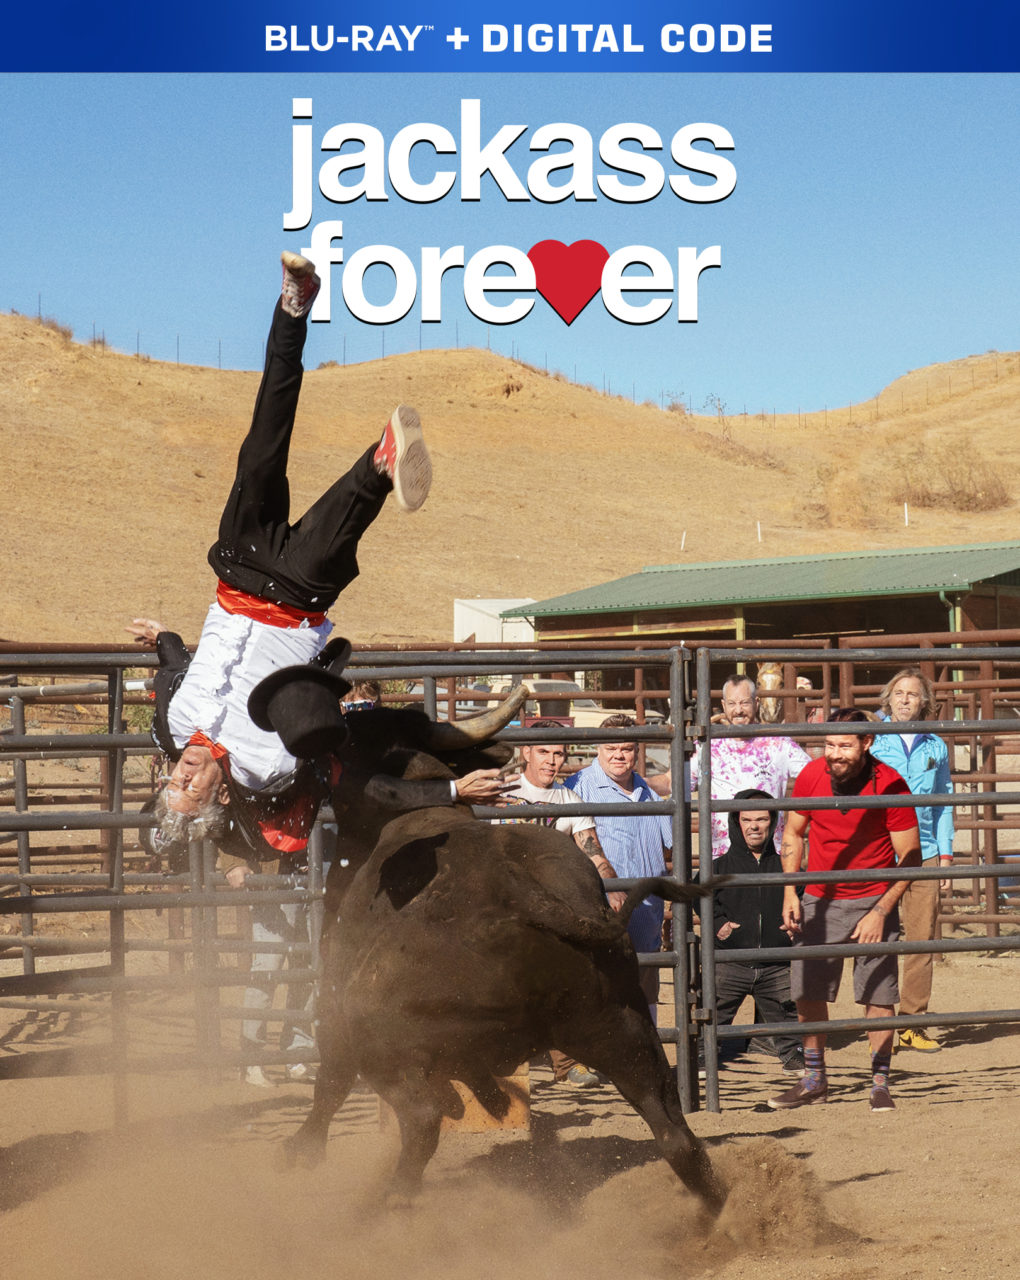 Jackass Forever Blu-Ray Combo Pack cover (Paramount Home Entertainment)